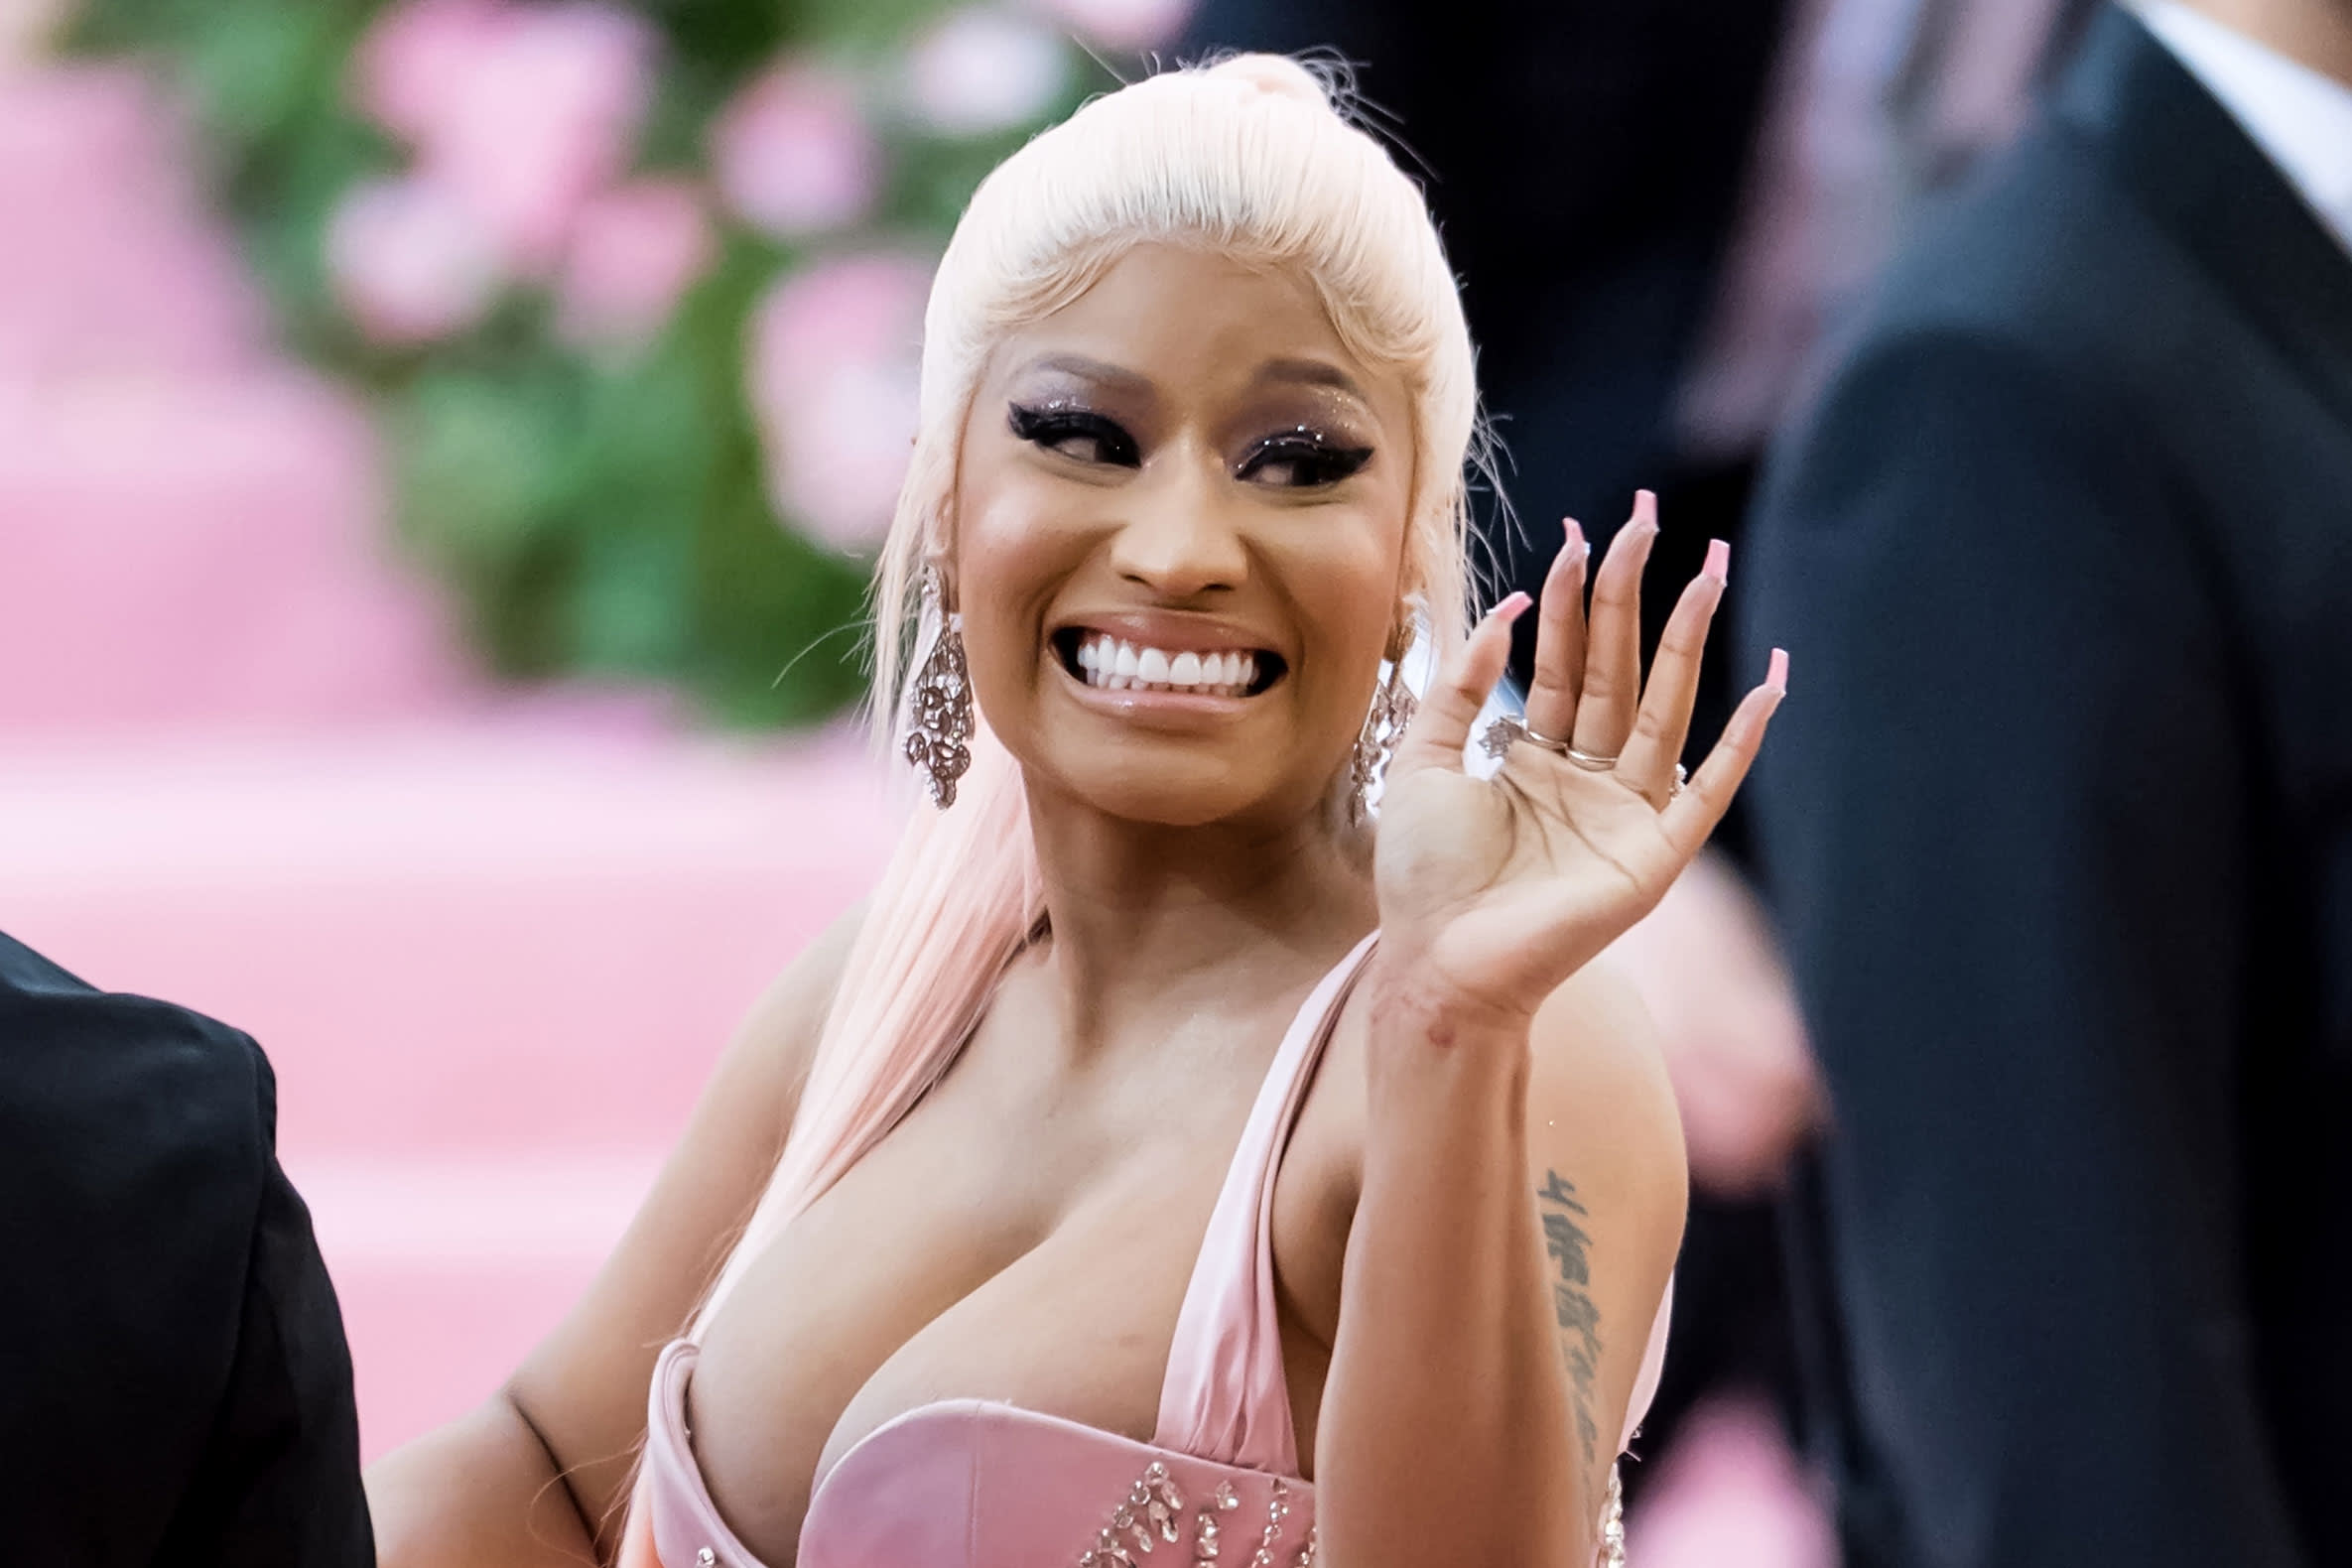 Rap artist Nicki Minaj faces backlash after tweeting inaccurate information about Covid vaccines